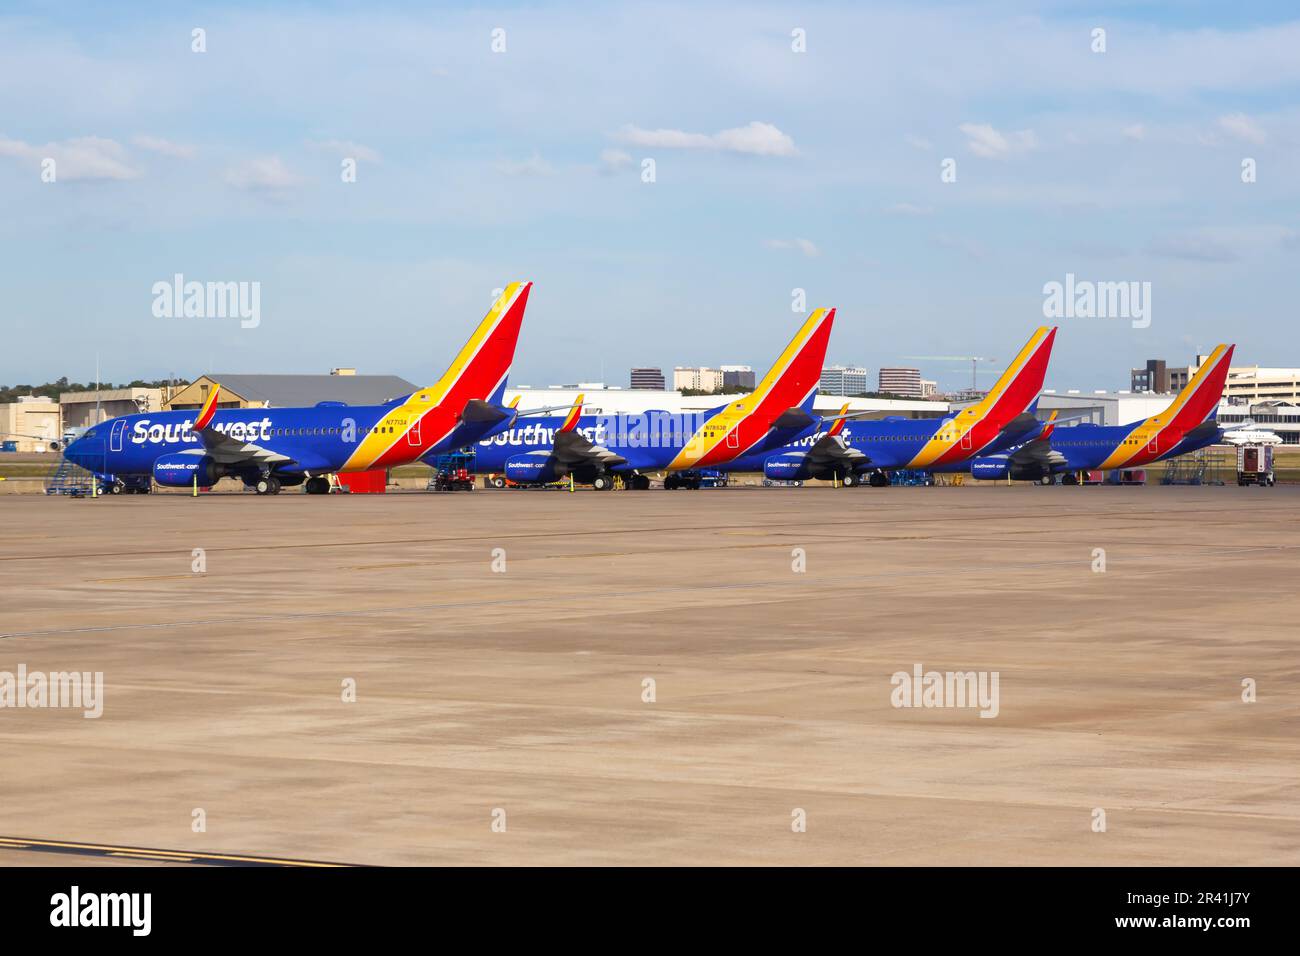 Southwest Airlines Boeing 737 aircraft Dallas Love Field airport in the USA Stock Photo